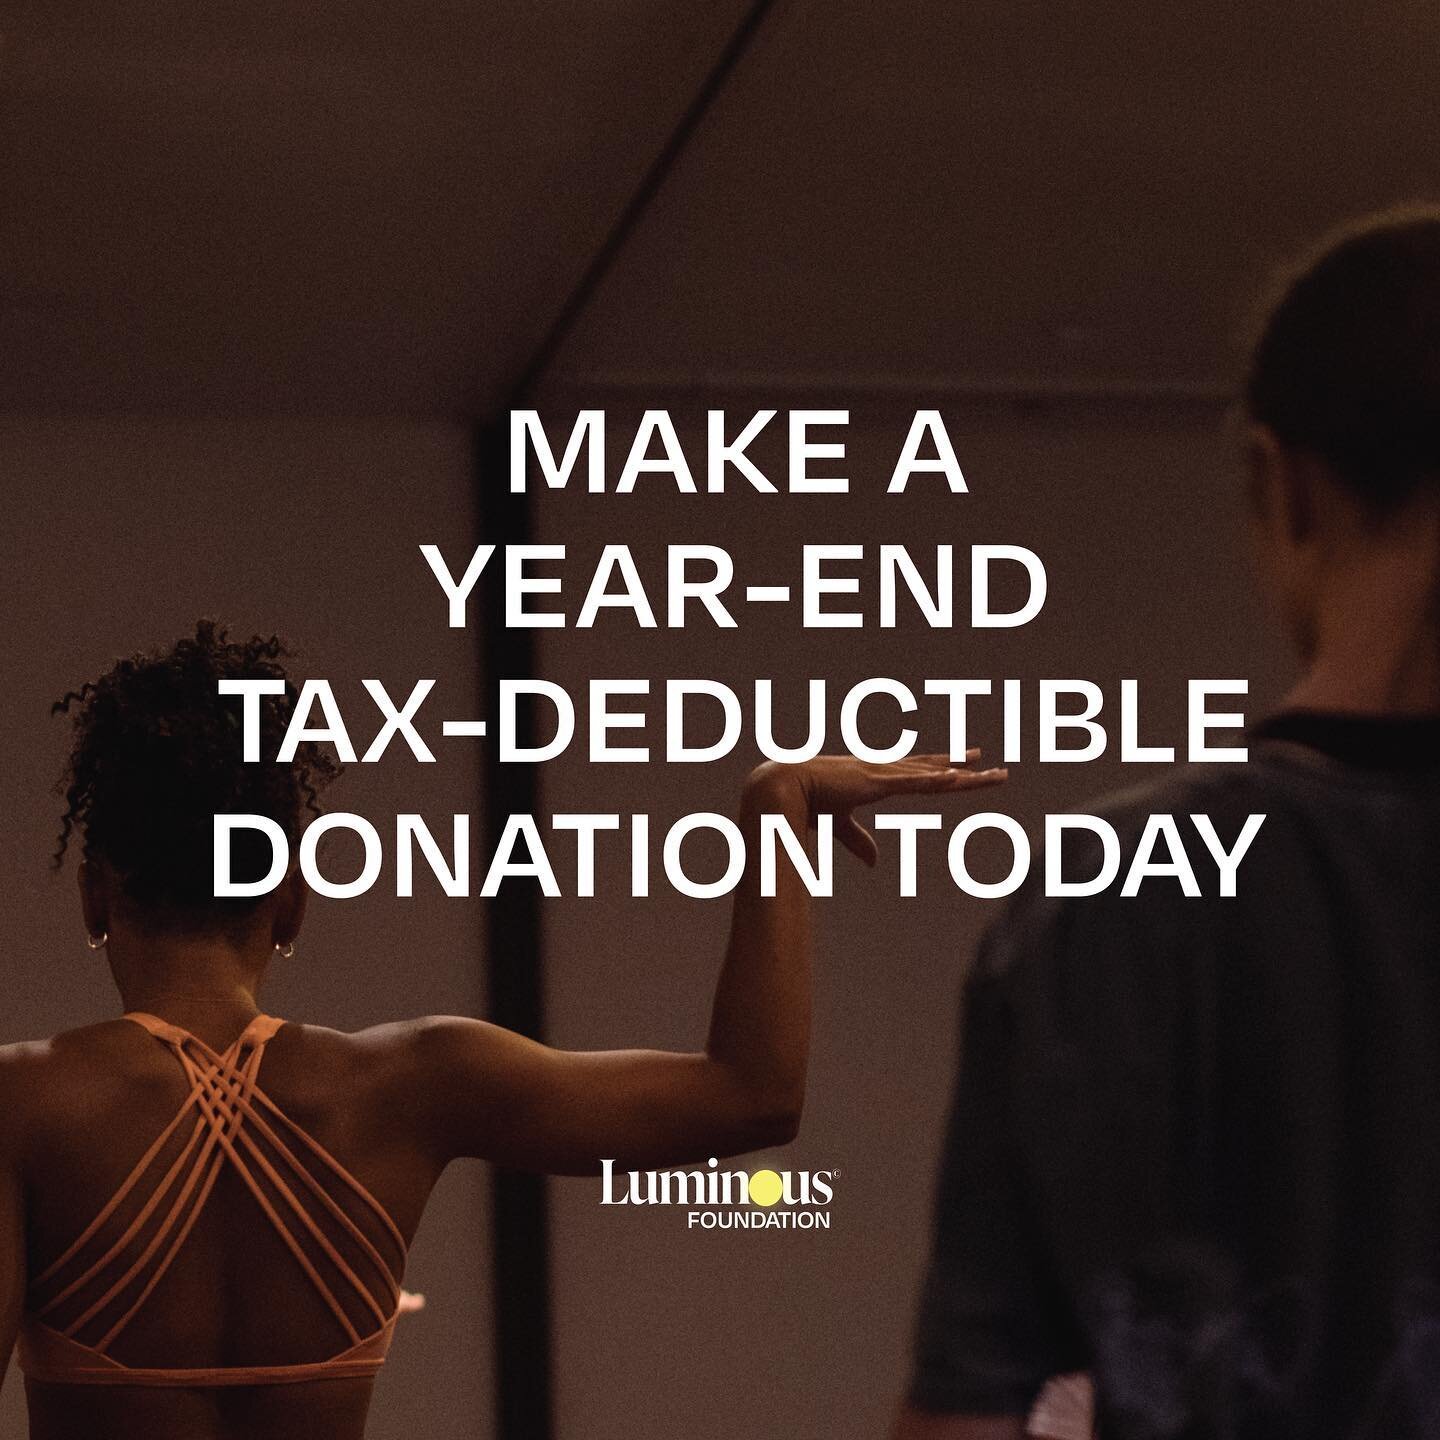 The Luminous Foundation is spreading the joy of dance! 

Make a year-end, tax-deductible donation today and sponsor and unforgettable weekend for a young dancer or dance studio ✨